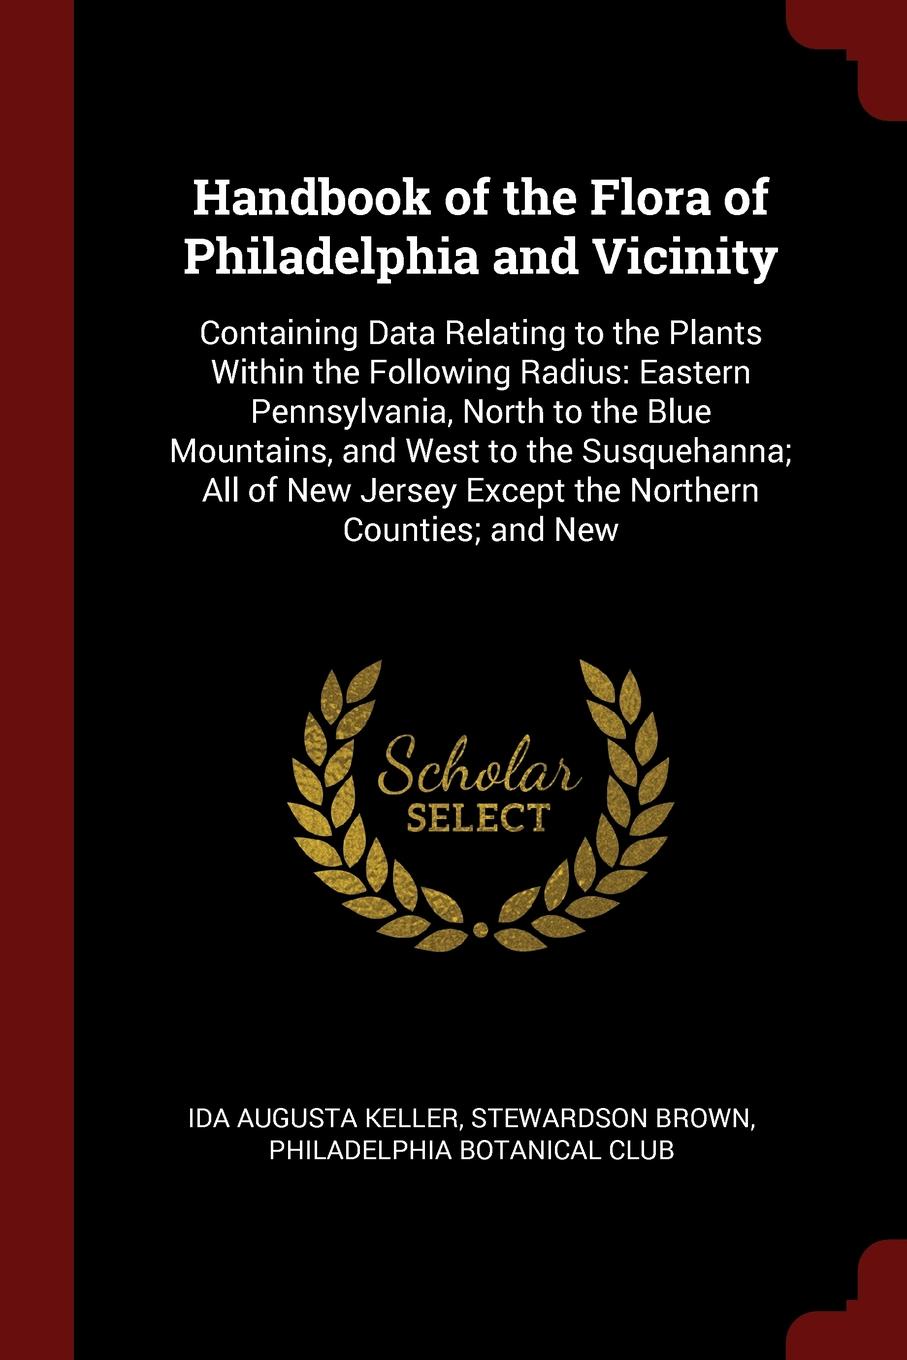 Handbook of the Flora of Philadelphia and Vicinity. Containing Data Relating to the Plants Within the Following Radius: Eastern Pennsylvania, North to the Blue Mountains, and West to the Susquehanna; All of New Jersey Except the Northern Counties;...